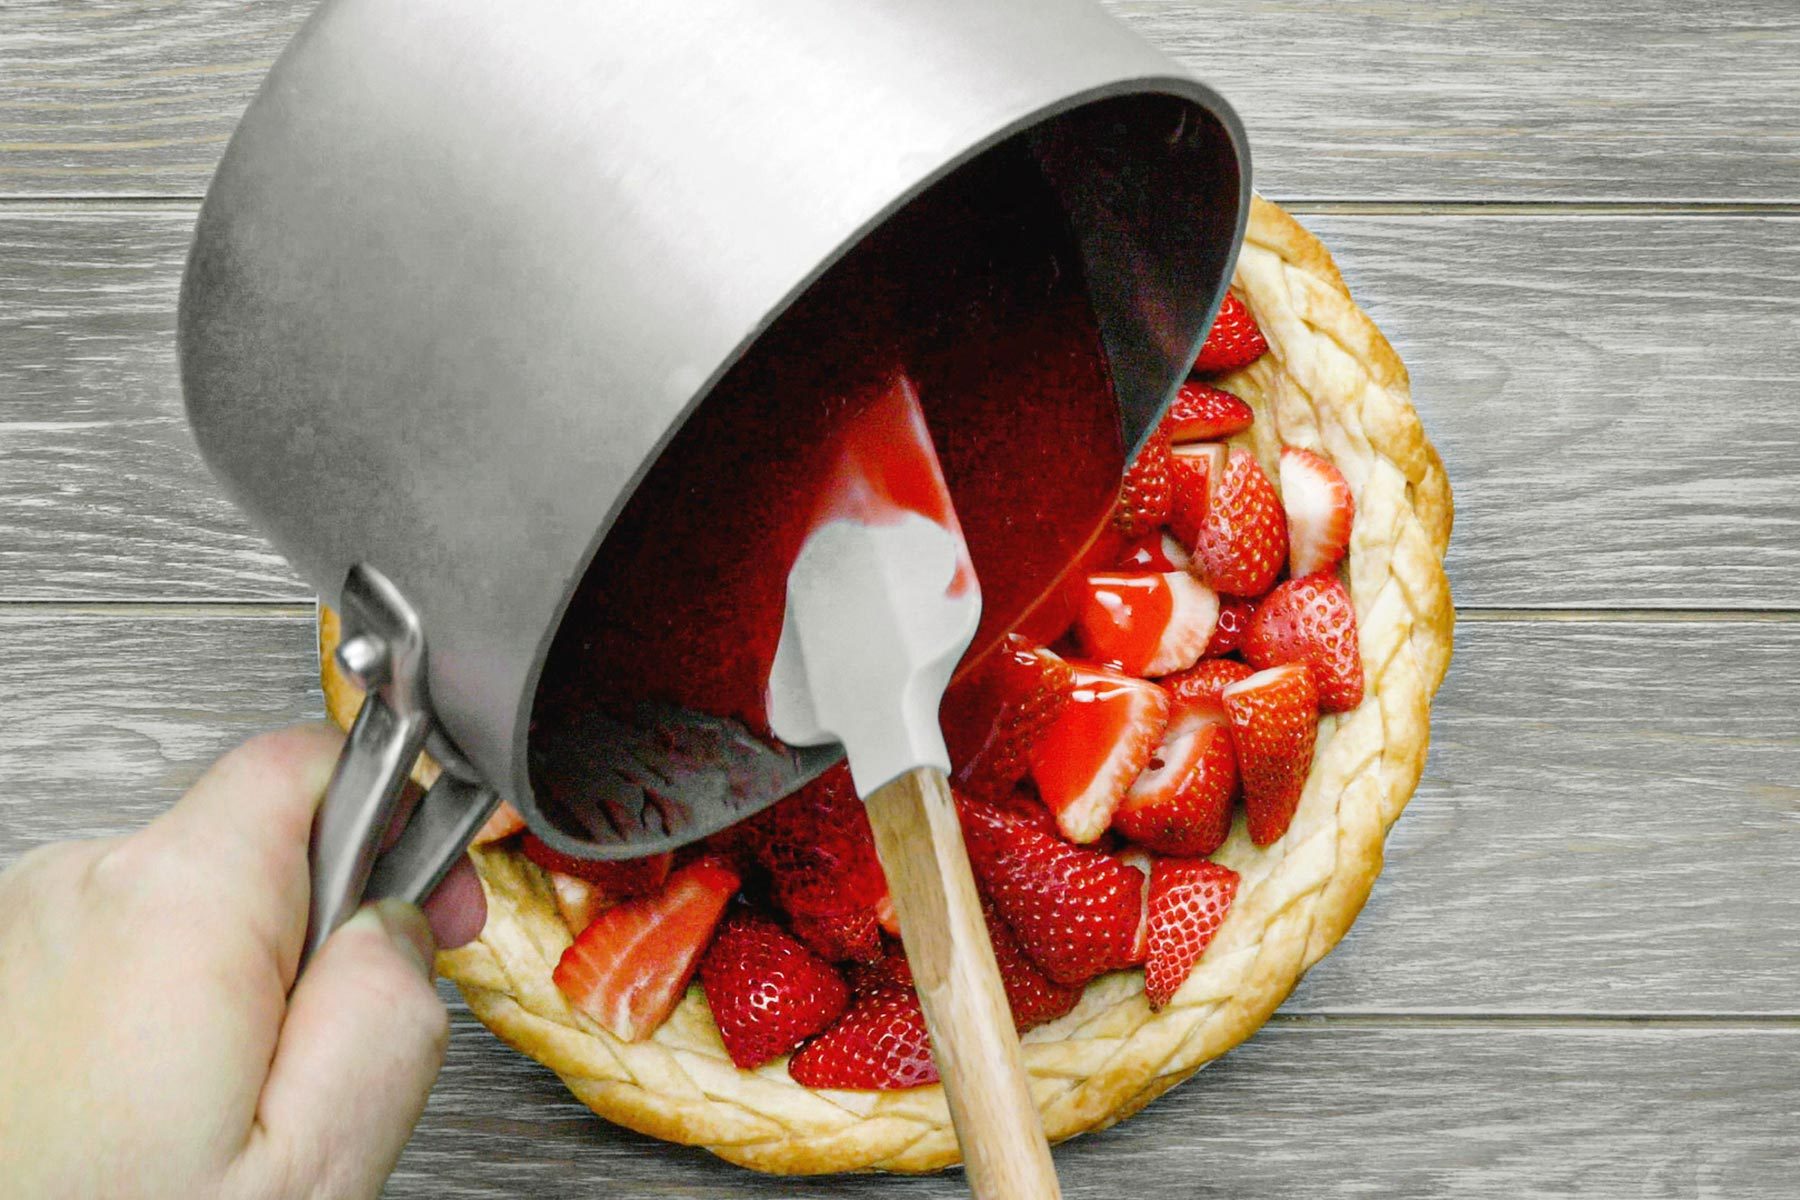 Pouring gelatin mixture over strawberries